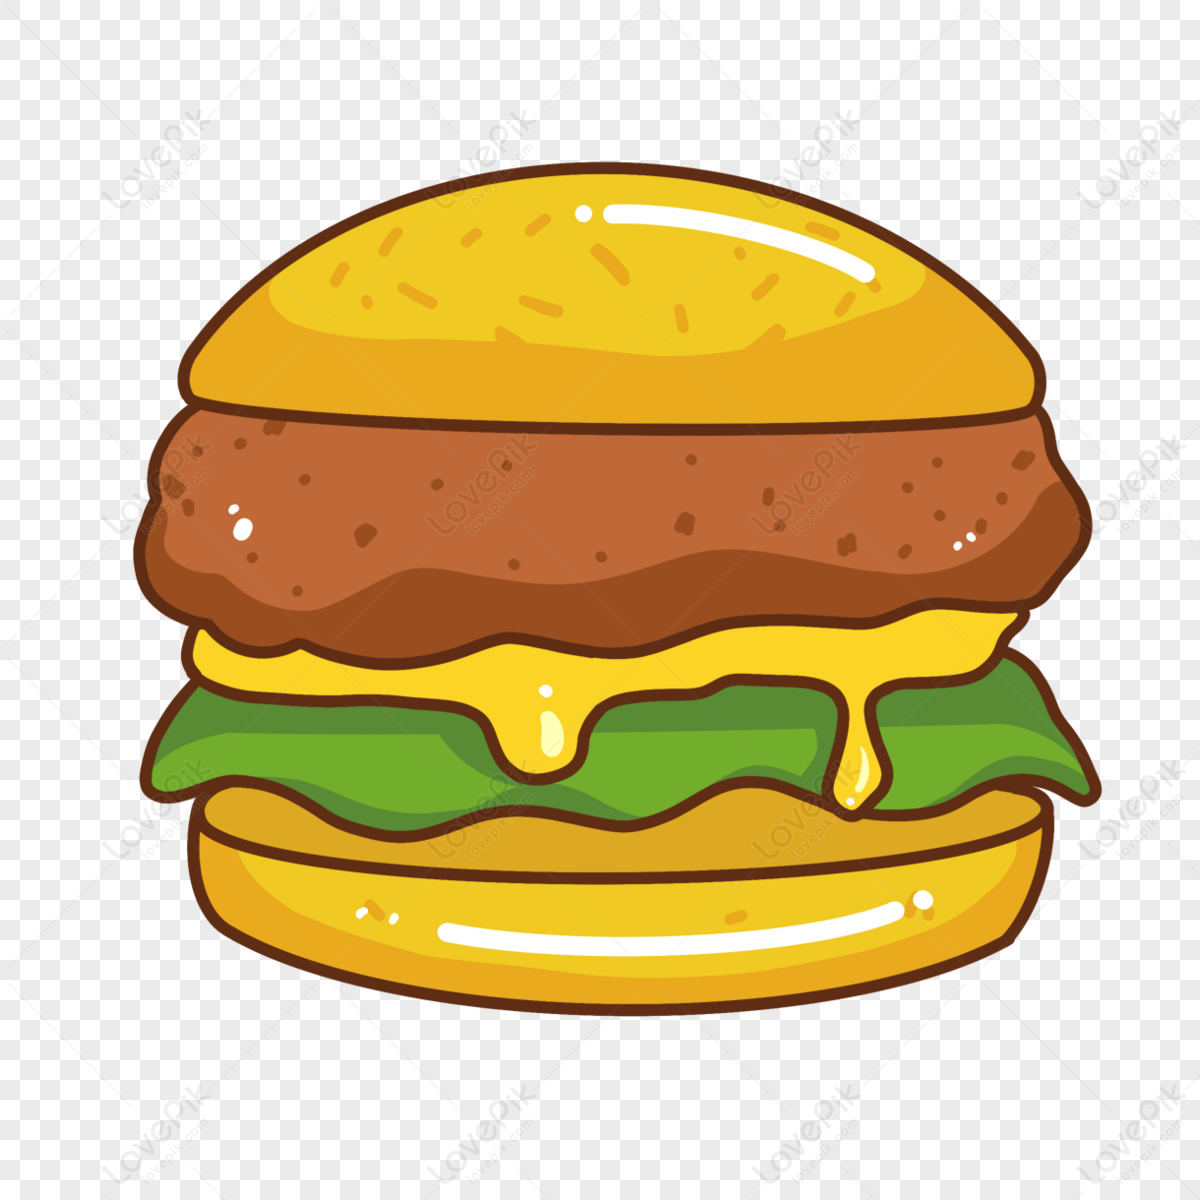 Burger Sticker PNG Images With Transparent Background